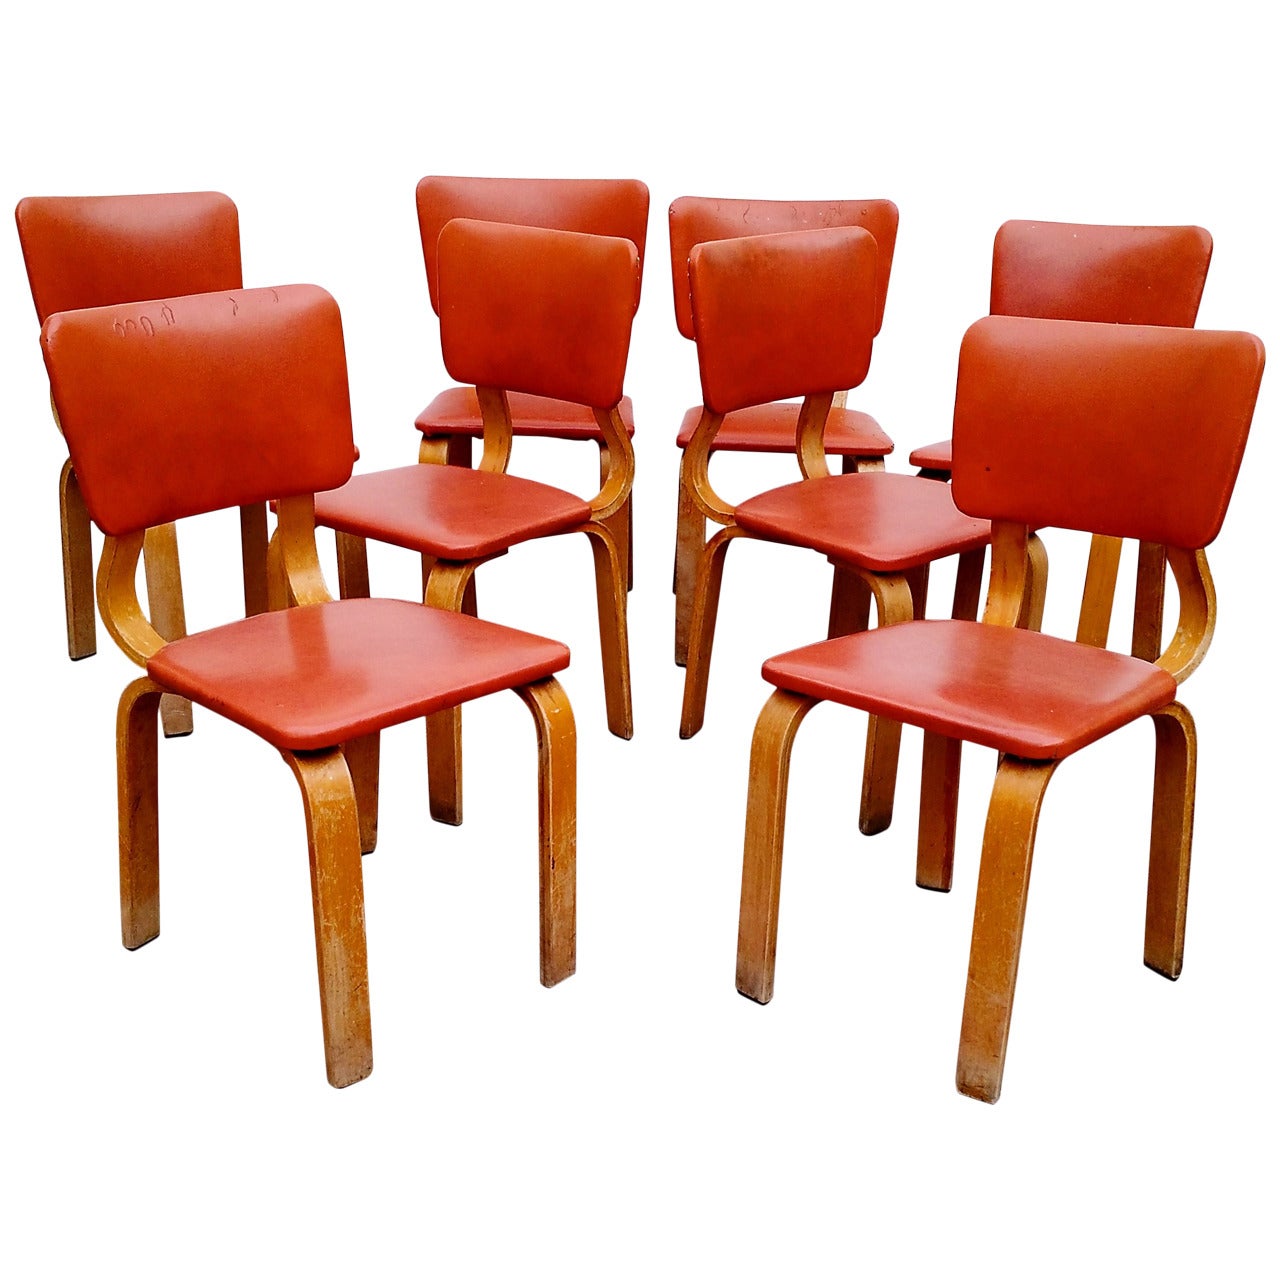 Original 1940 Thonet Bentwood Dining Chairs, Set of Eight